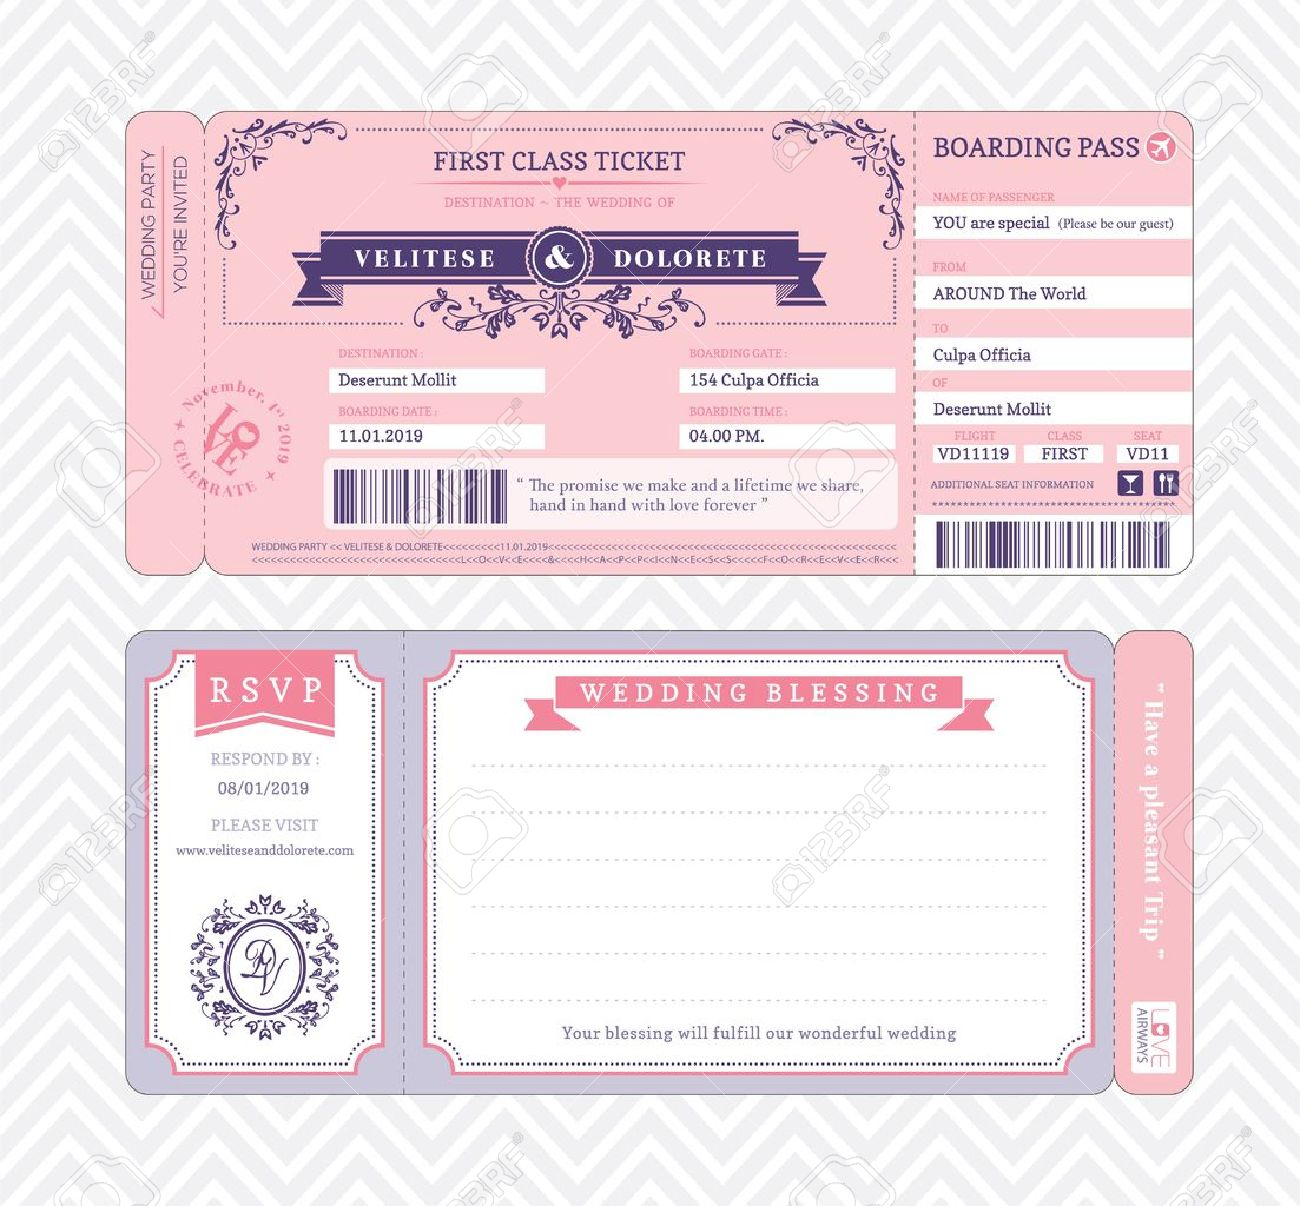 Boarding Pass Ticket Wedding Invitation Template Royalty Free within dimensions 1300 X 1206